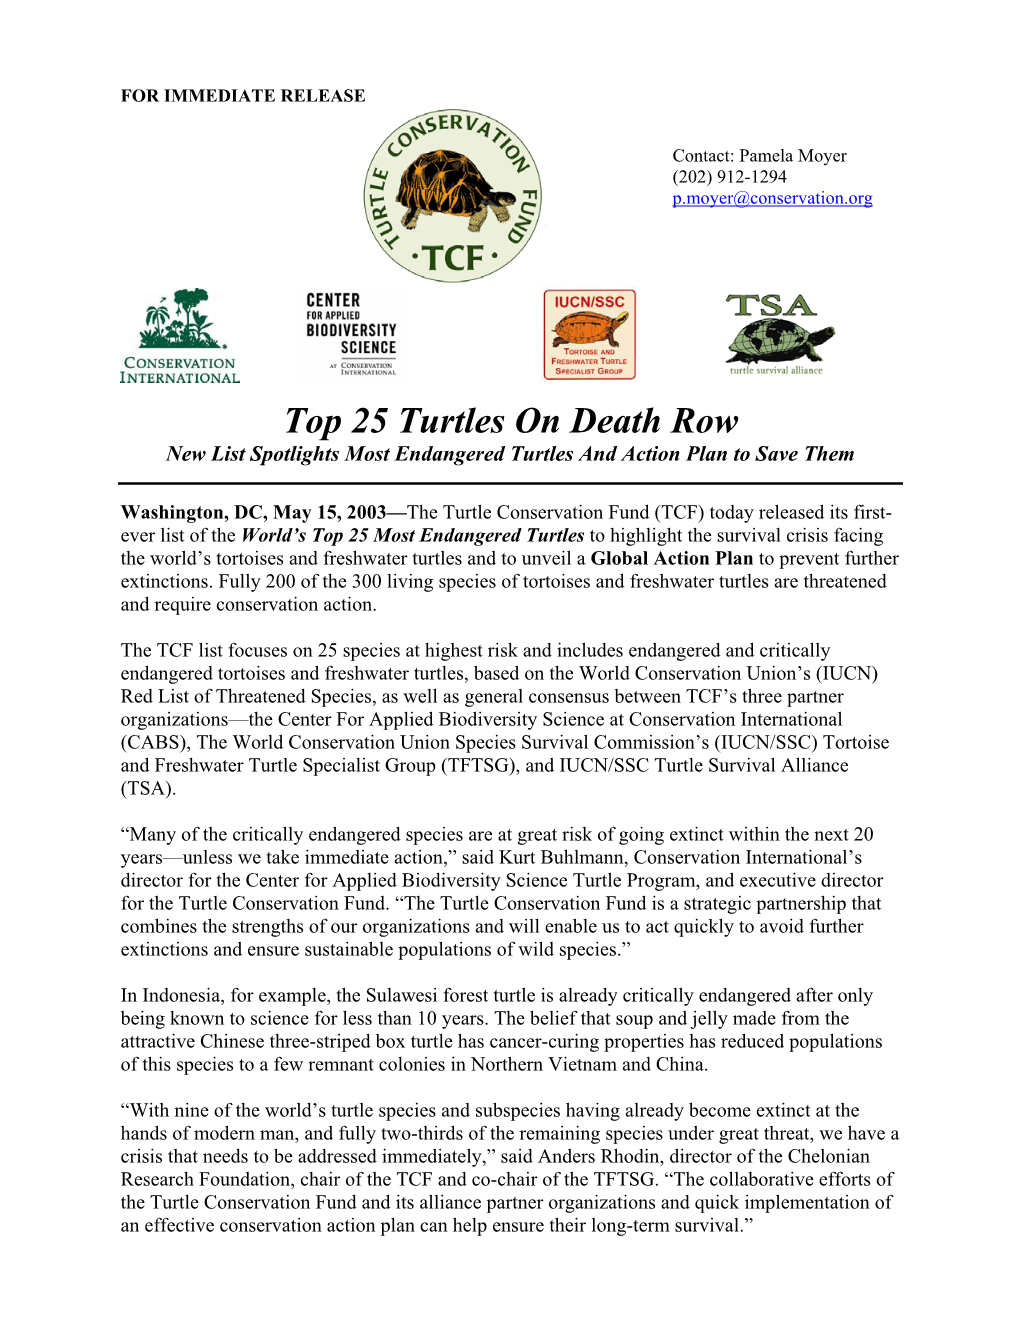 Top 25 Turtles on Death Row New List Spotlights Most Endangered Turtles and Action Plan to Save Them